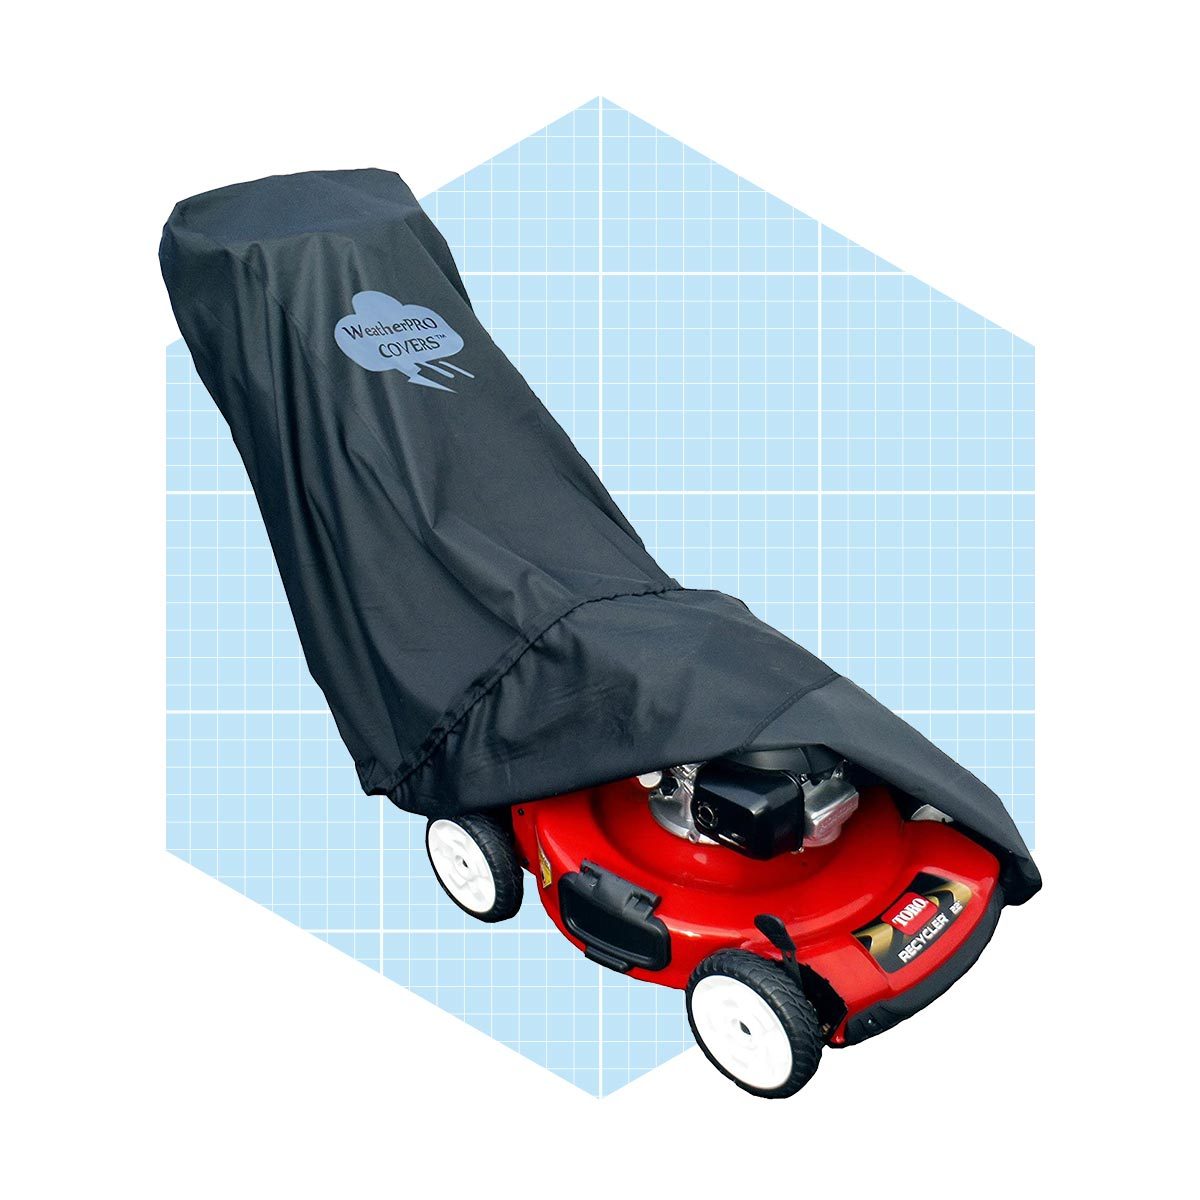 5 Best Lawn Mower Covers for Protection Against Weather and Debris